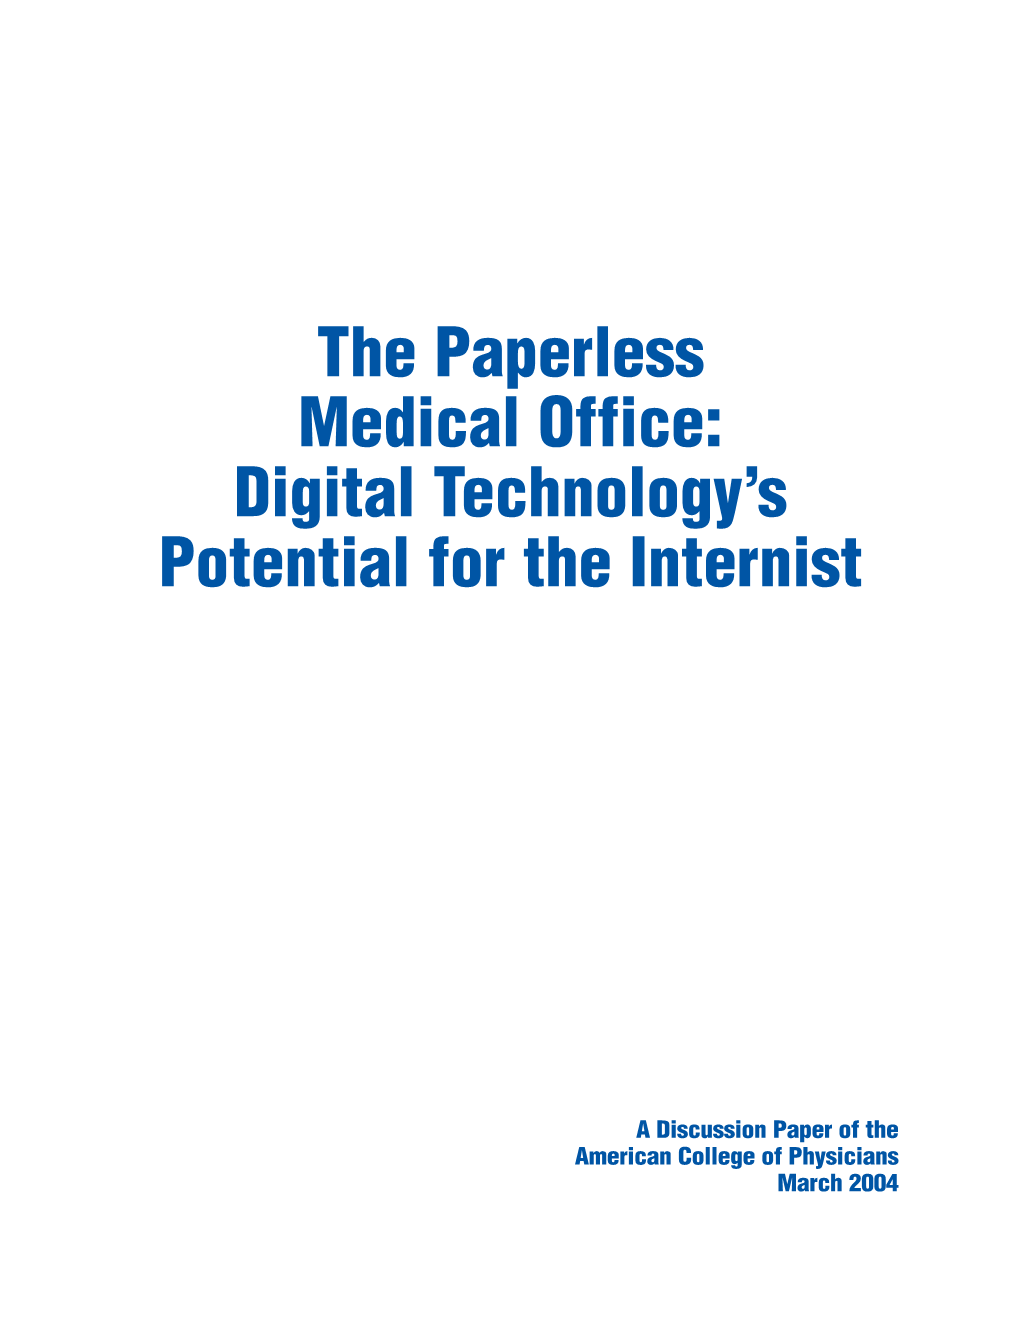 The Paperless Medical Office: Digital Technology's Potential for the Internist